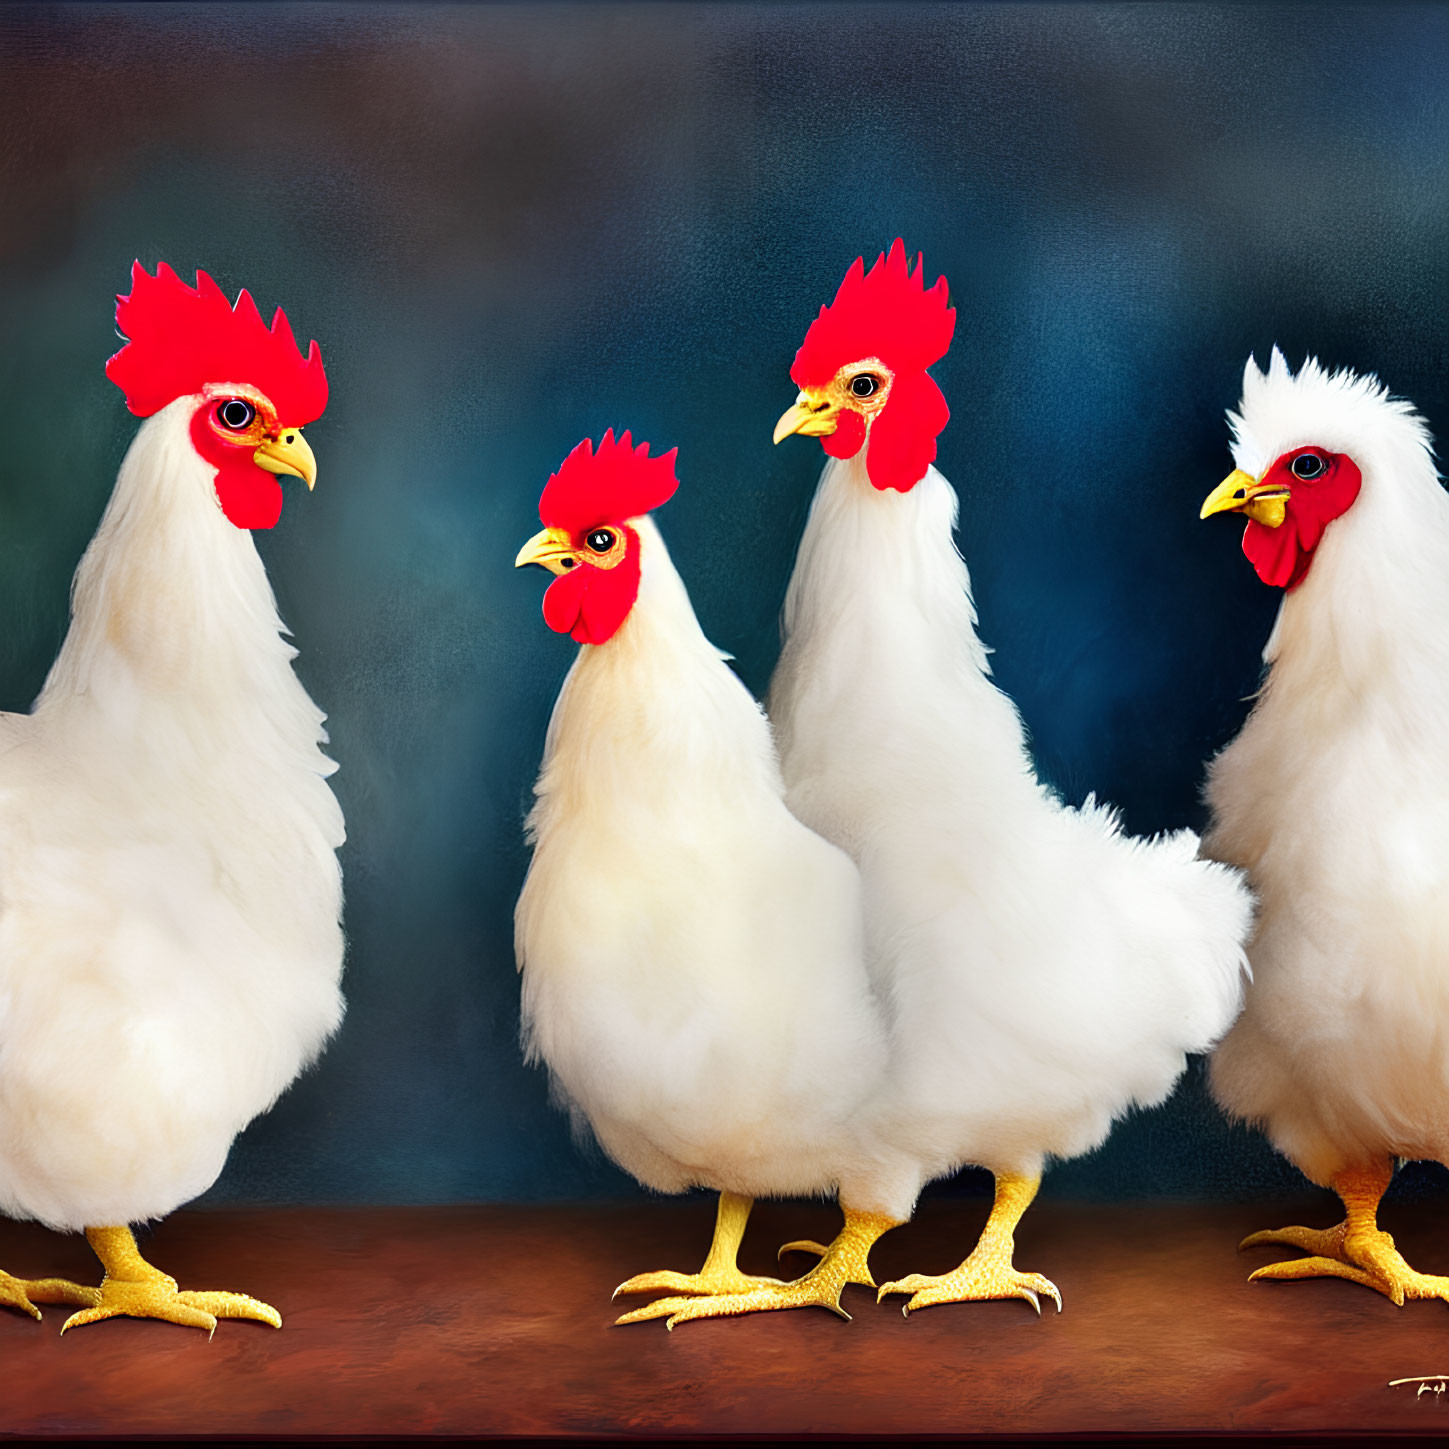 Four cartoon chickens with red combs and waddles on blue and brown gradient.